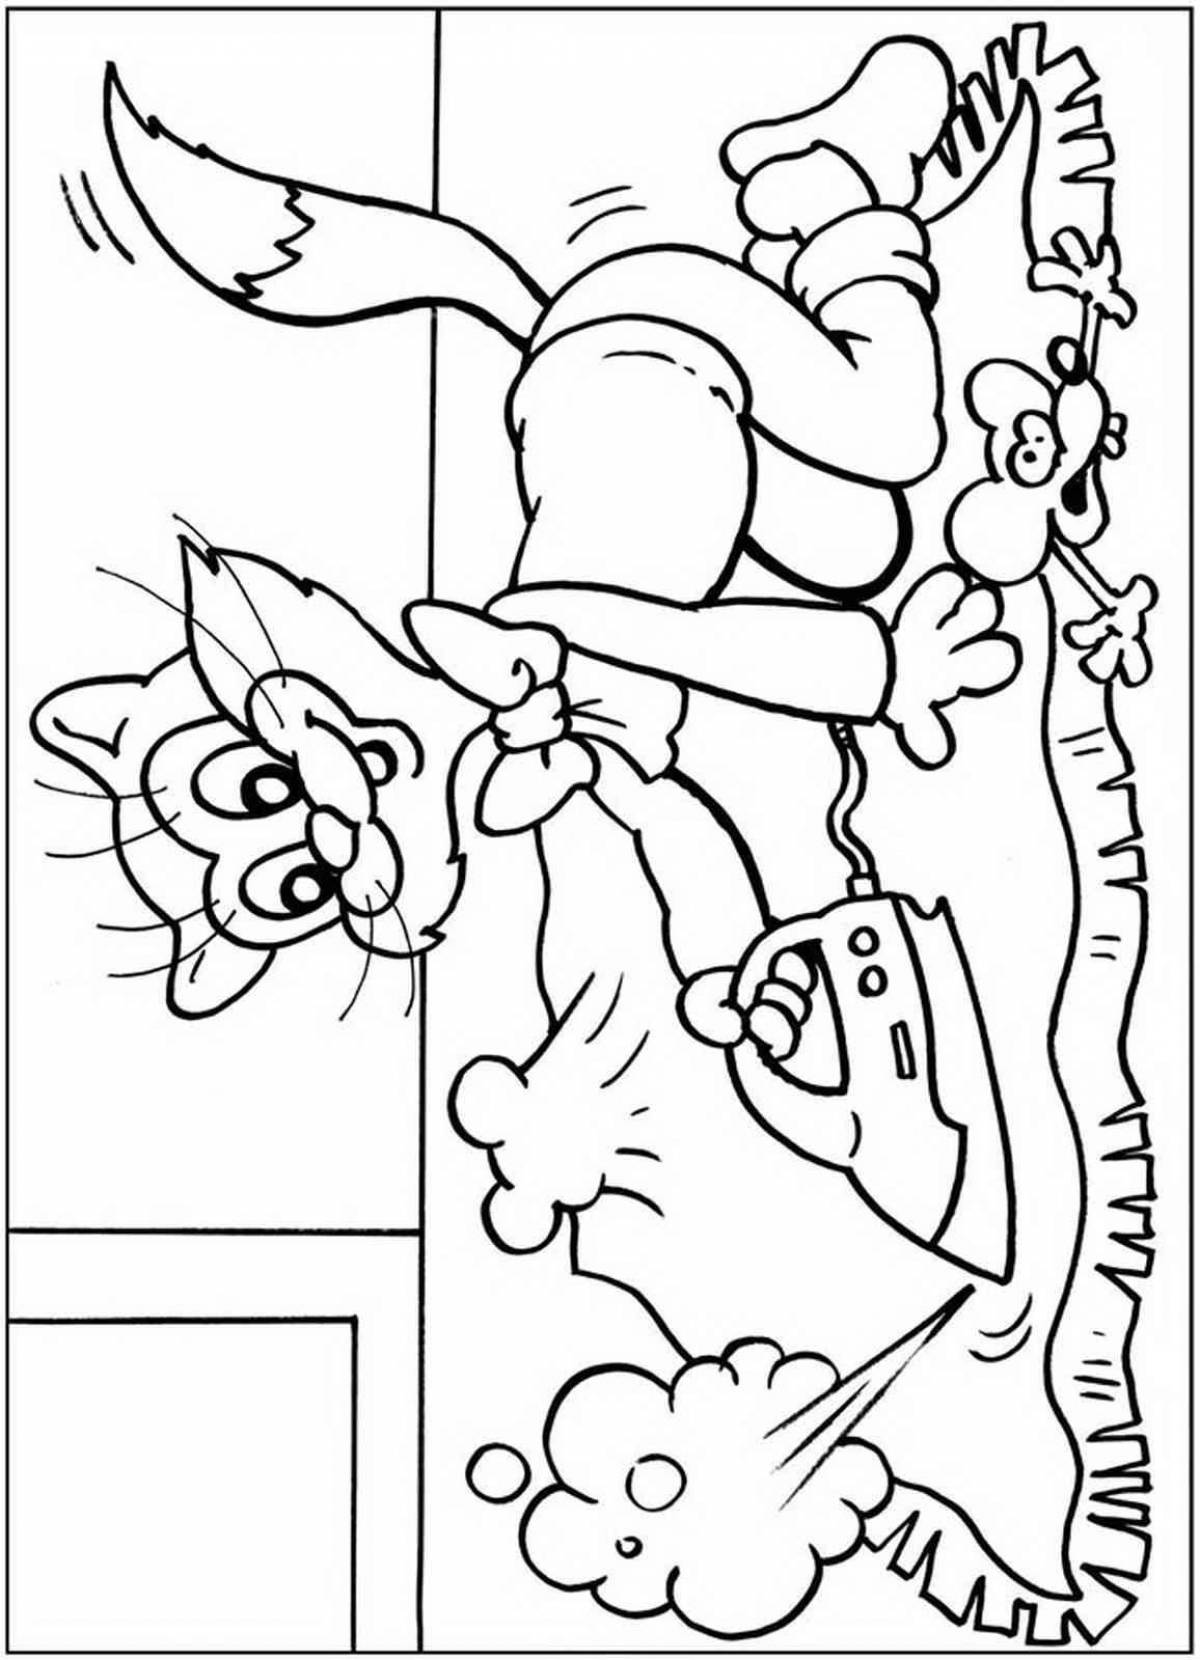 Coloring page wonderful cat leopold